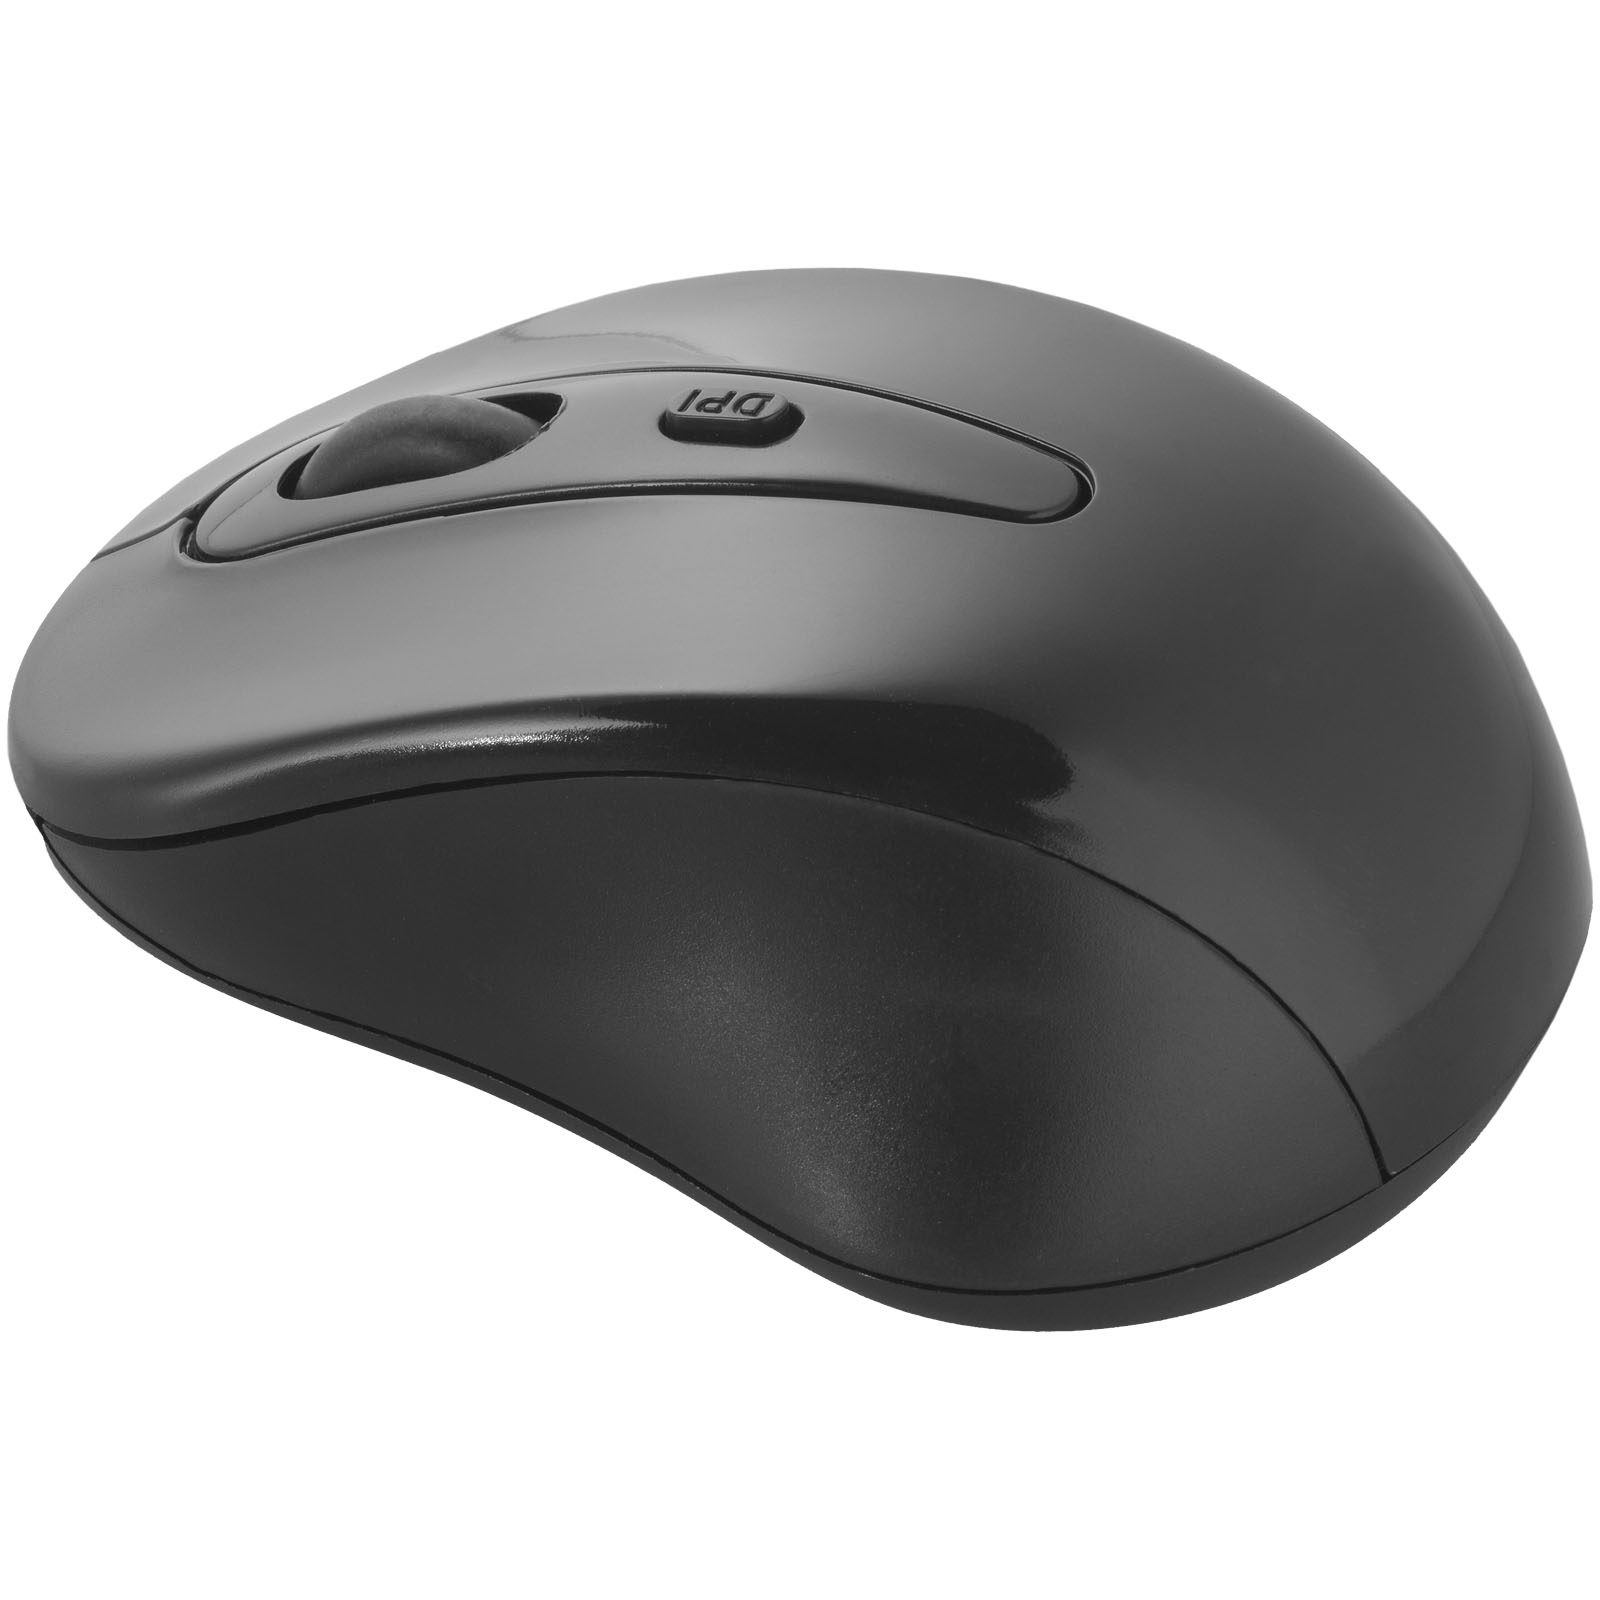 Technology - Stanford wireless mouse